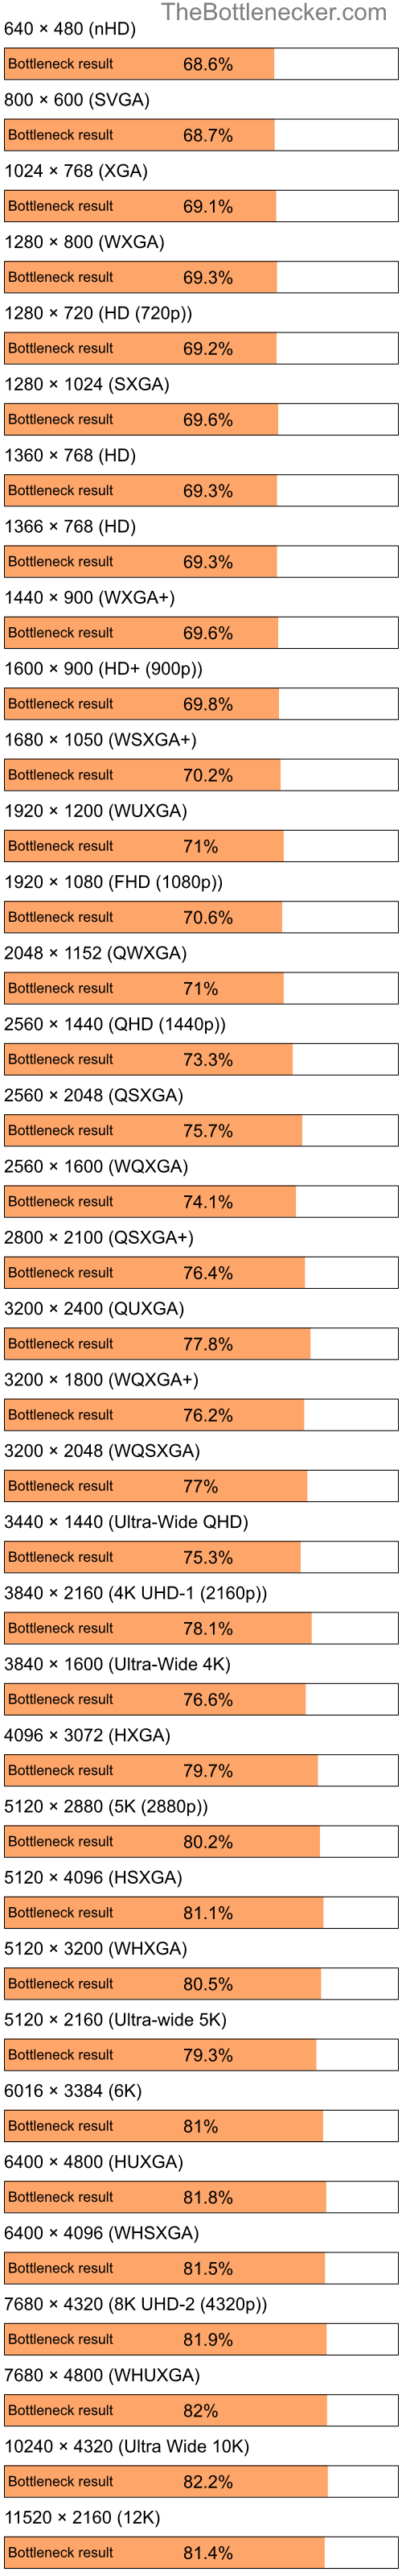 Bottleneck results by resolution for Intel Celeron M and NVIDIA GeForce GT 320M in Graphic Card Intense Tasks